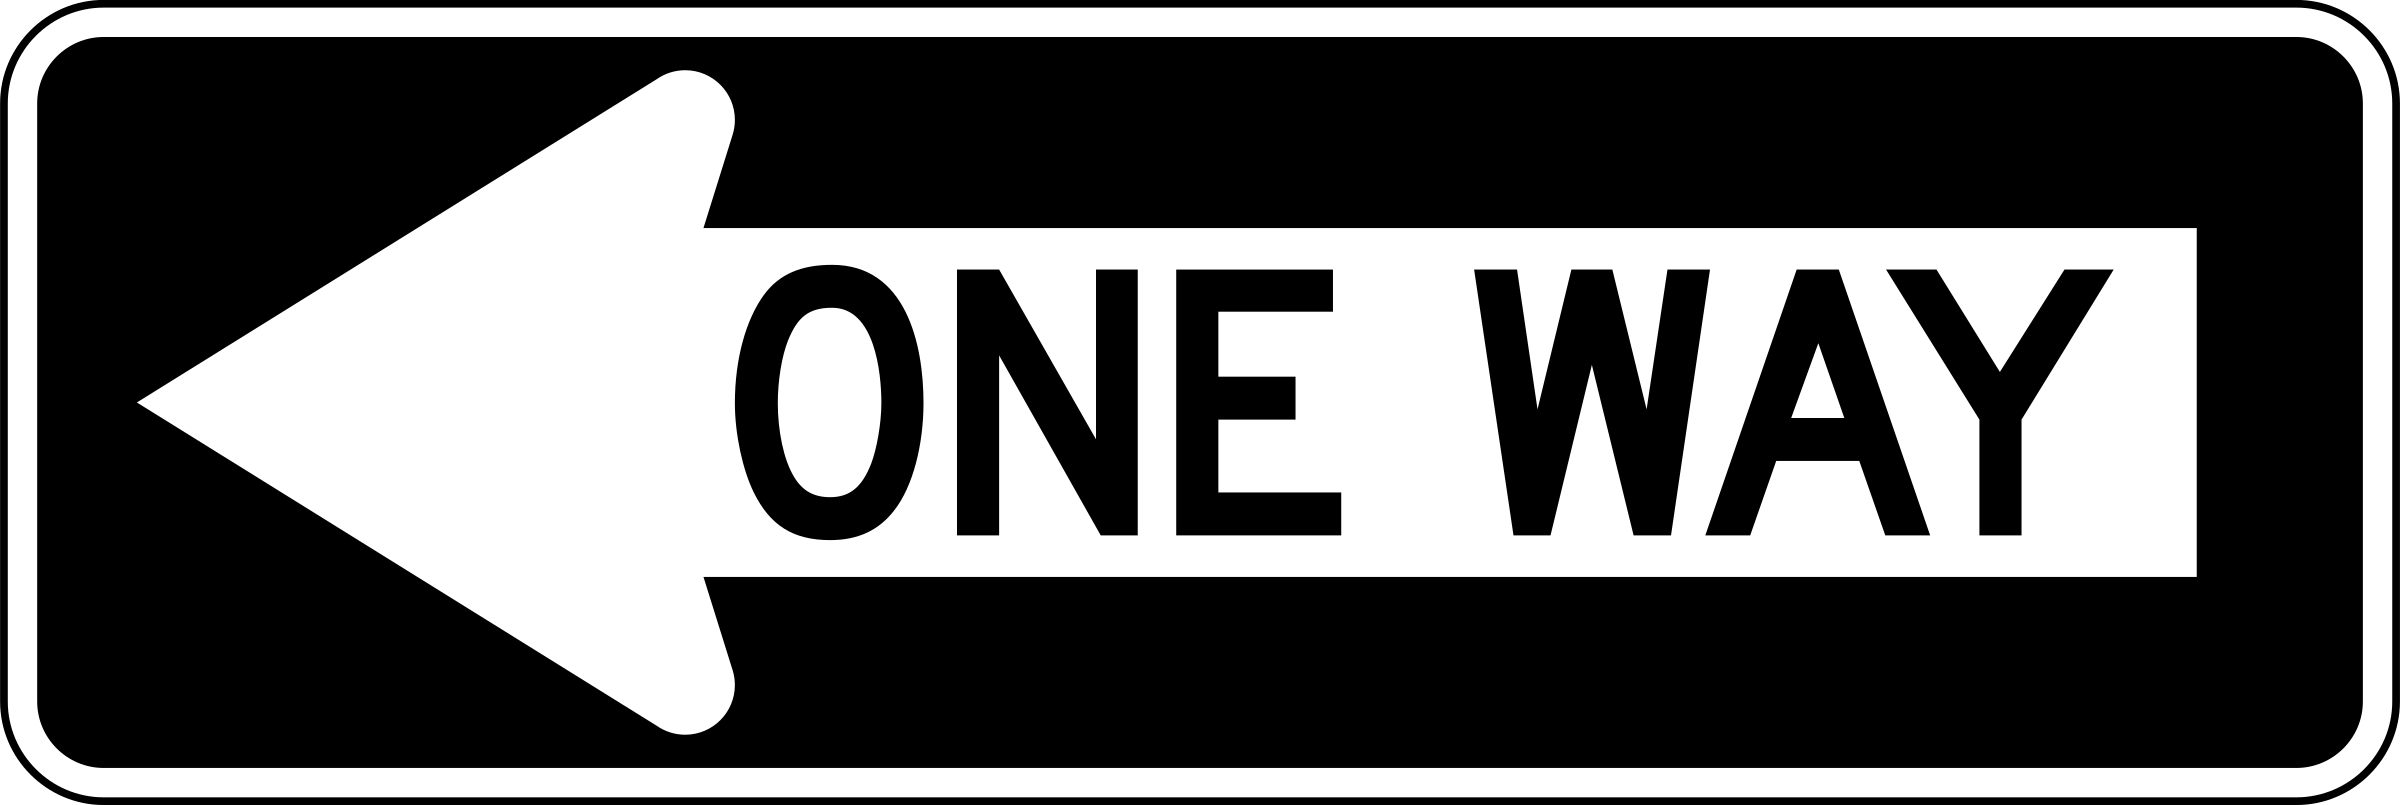 One Way Road Clipart.